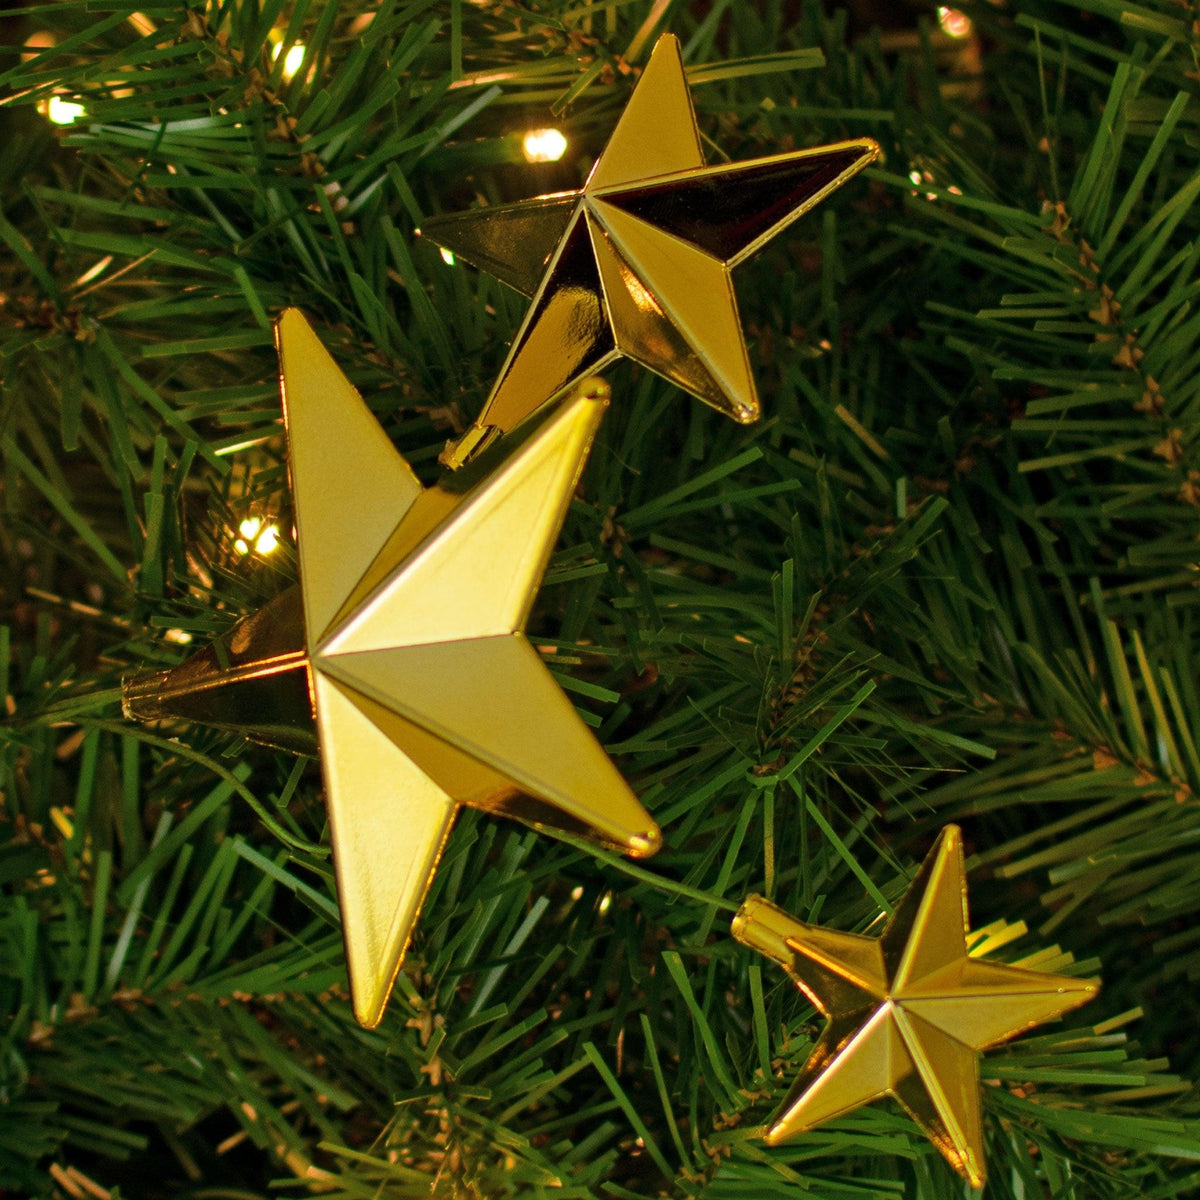 24 Pack, Gold Star Pick Ornaments, Holiday Decor